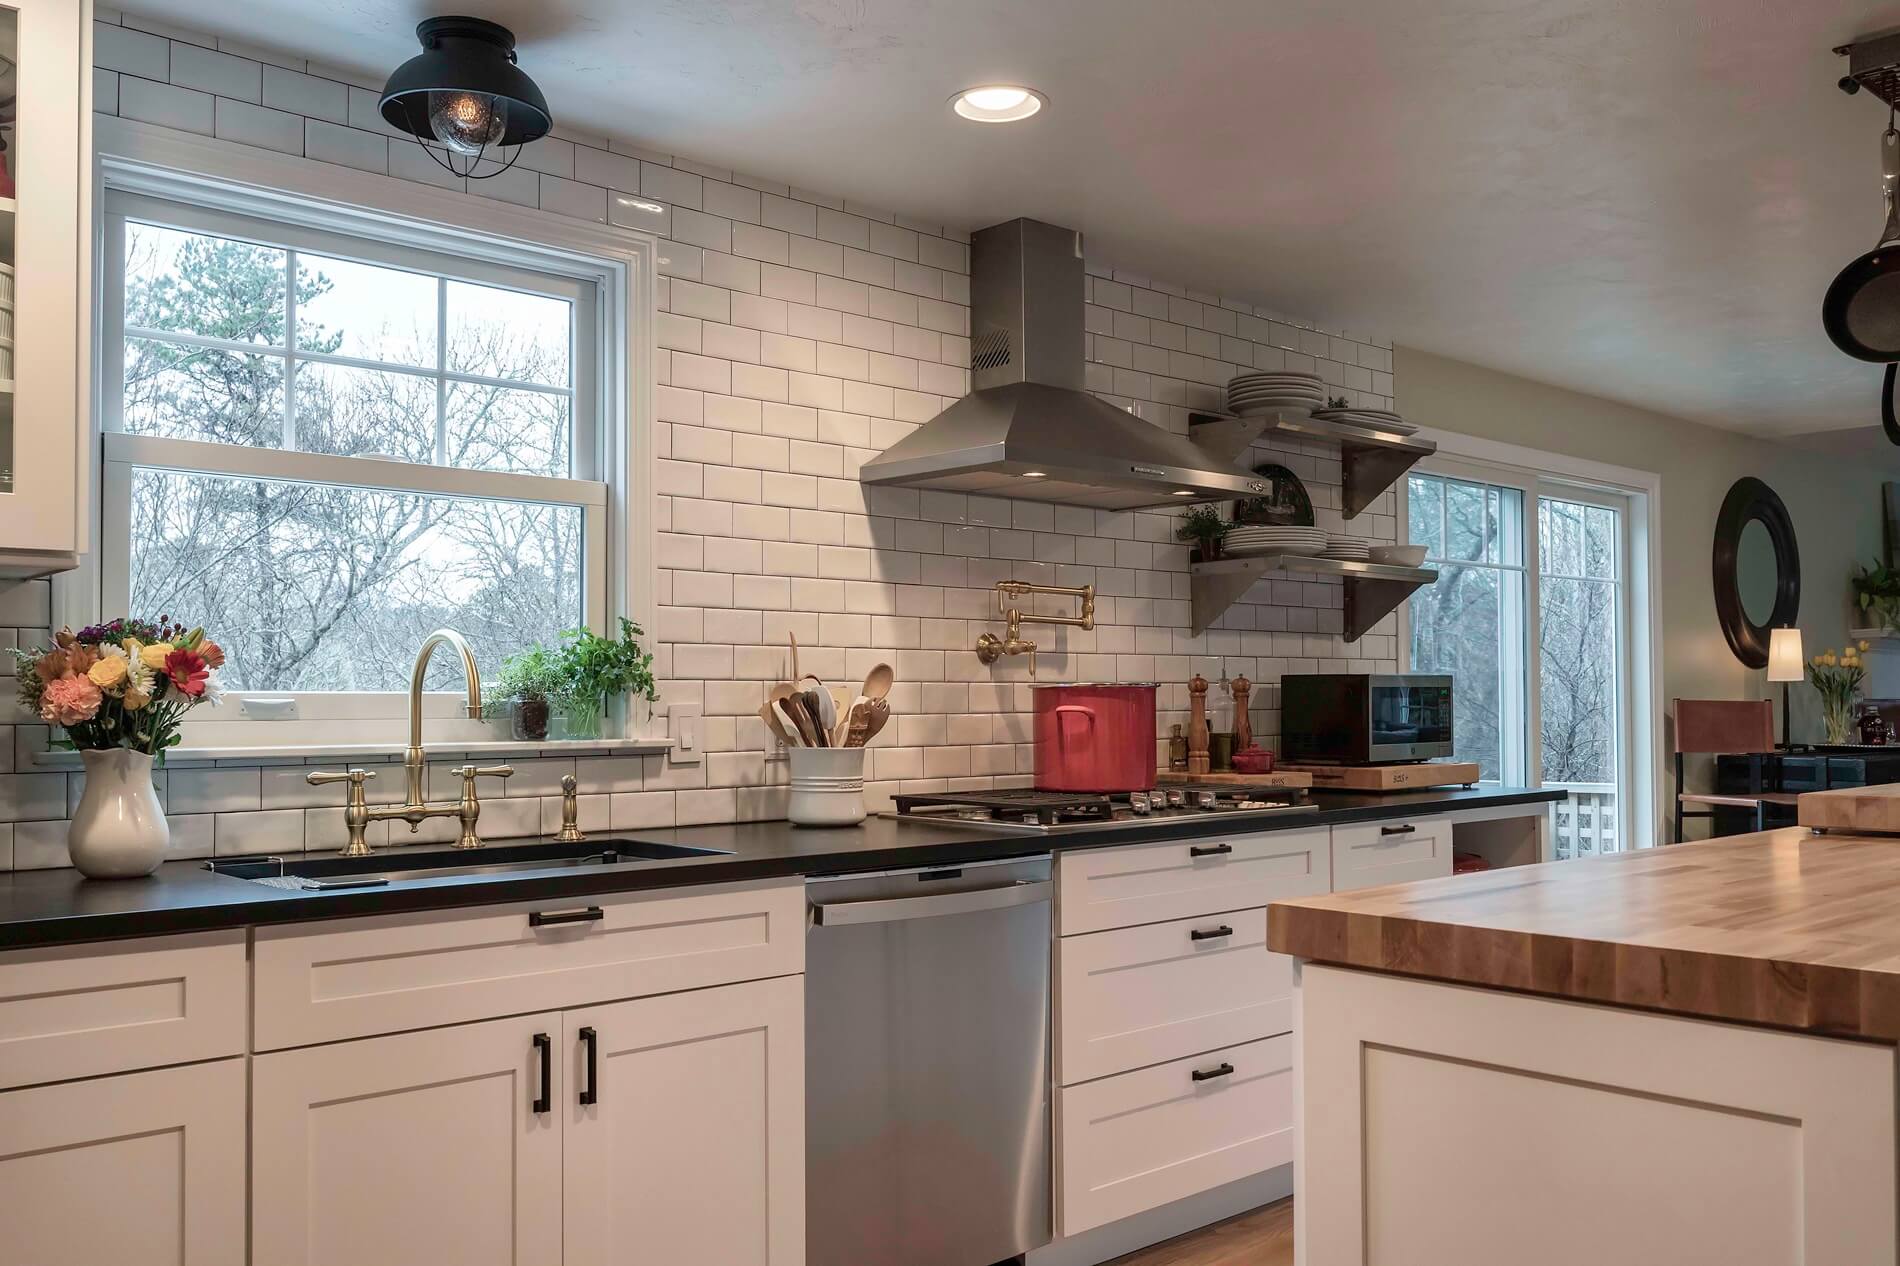 How Do You Know When It’s Time To Remodel Your Kitchen